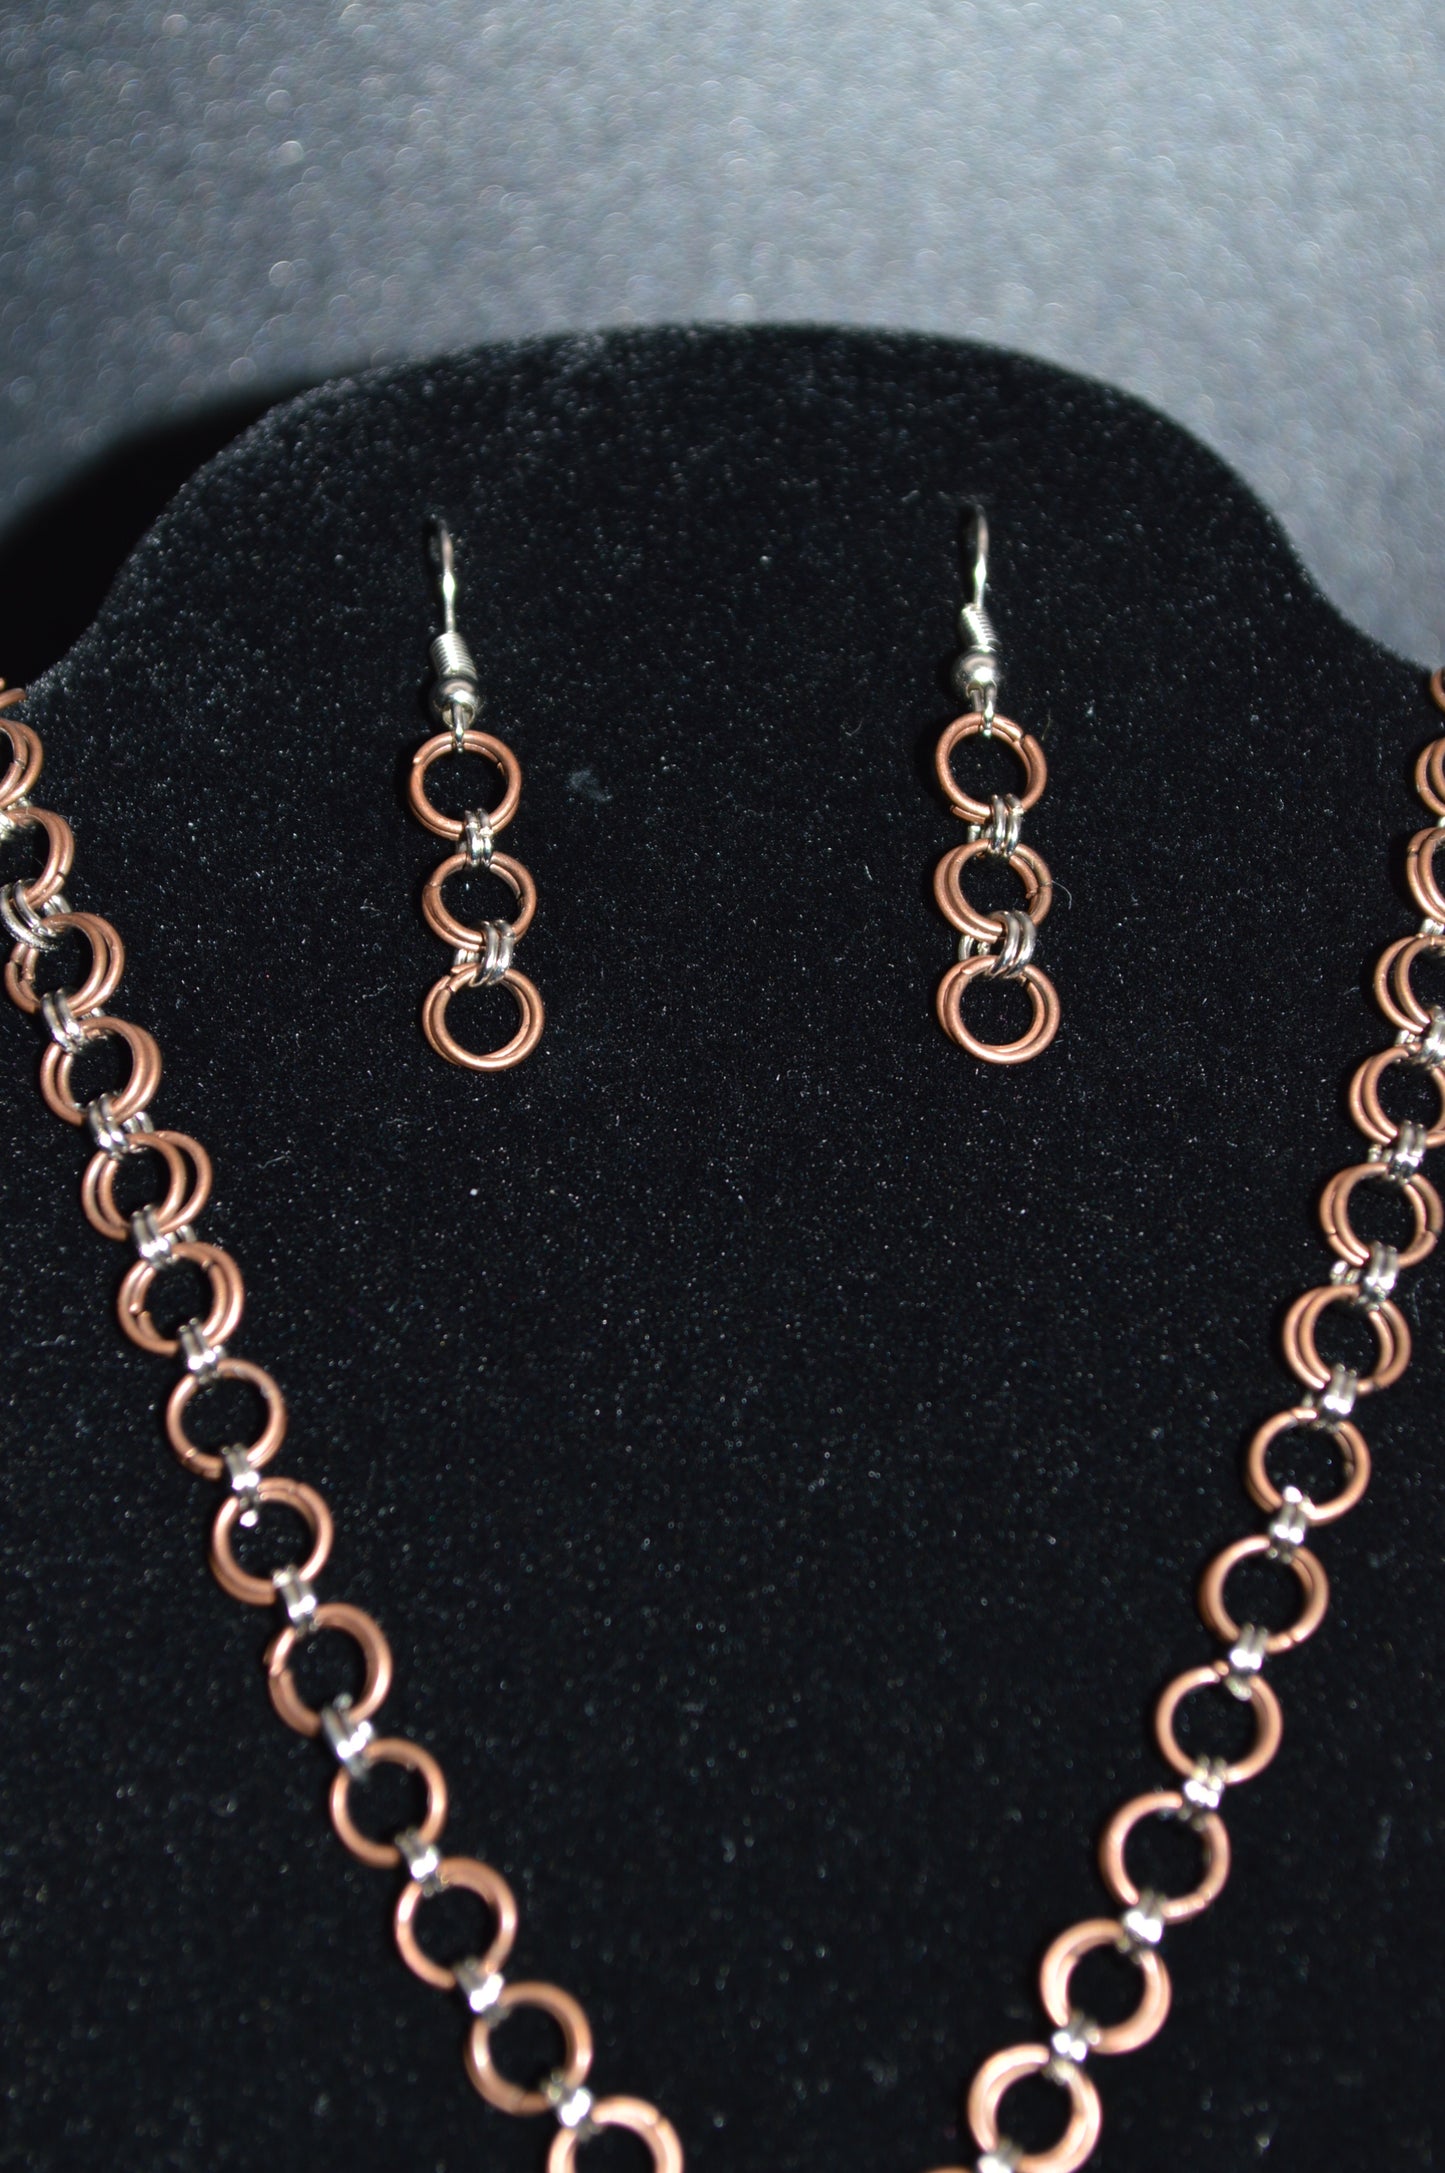 Copper and Stainless Steel Hand Linked Chainmail Necklace and Earring Set